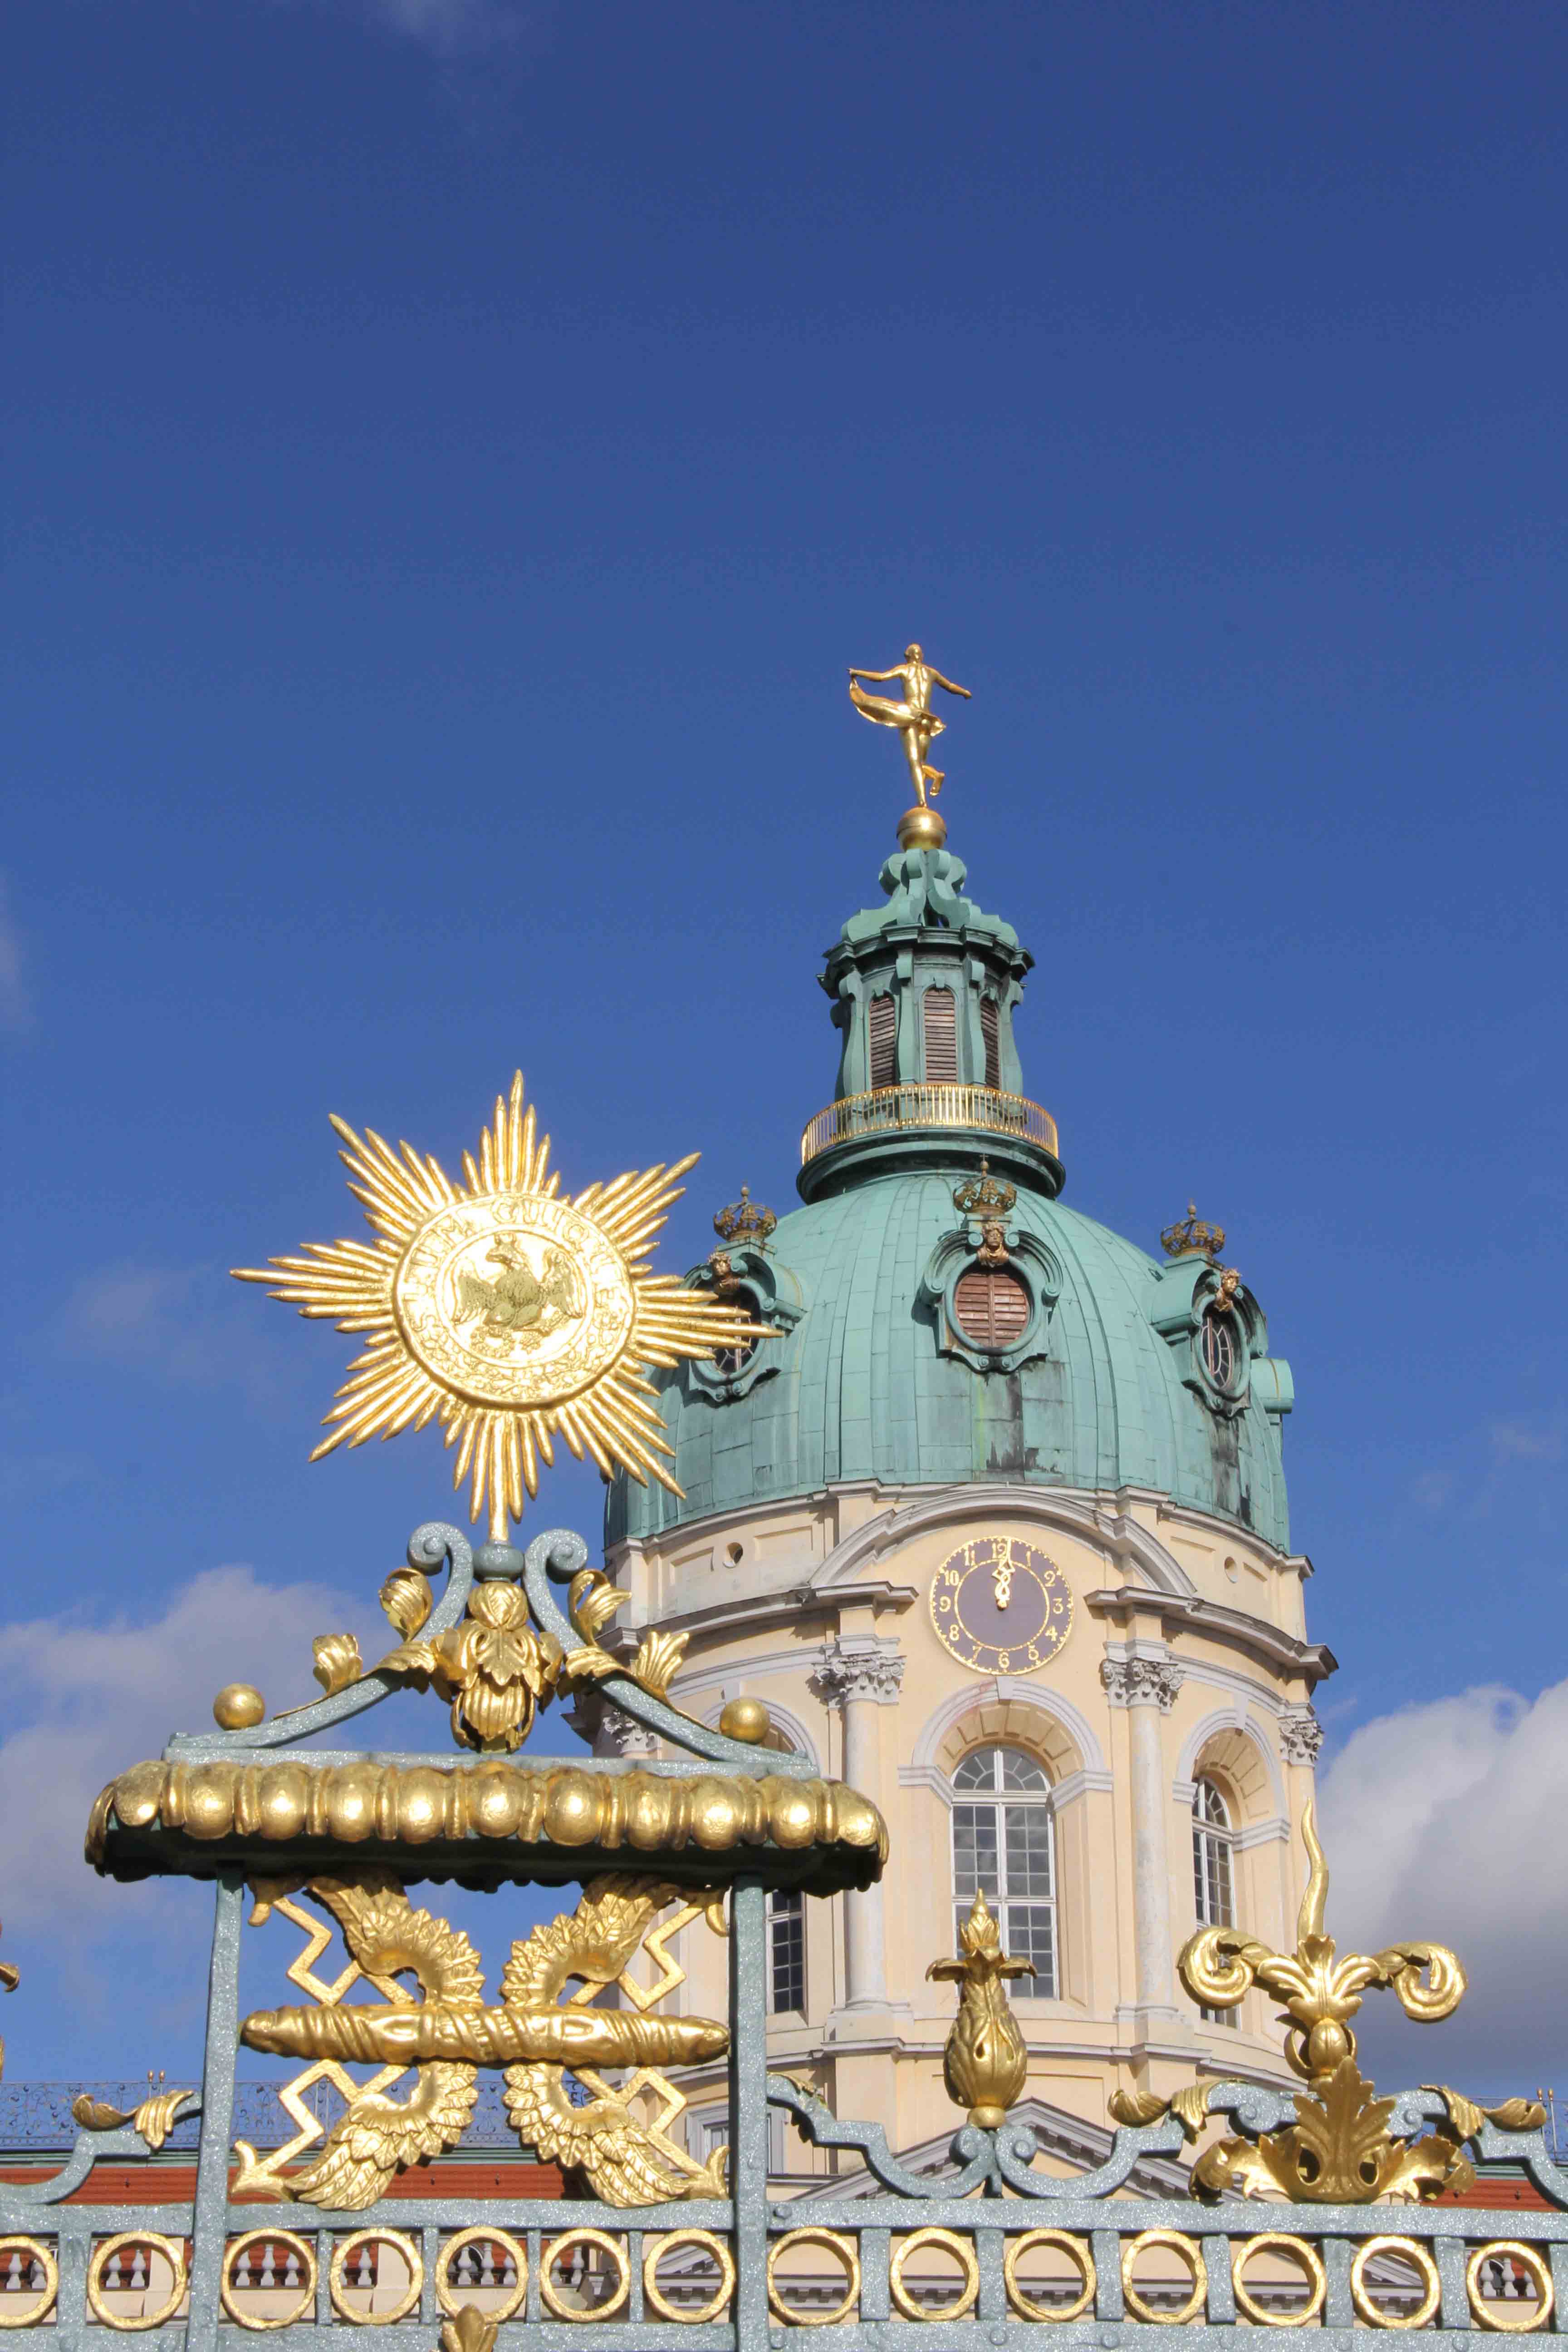 The ornate gates and cupola of Schloss Charlottenburg in Berlin